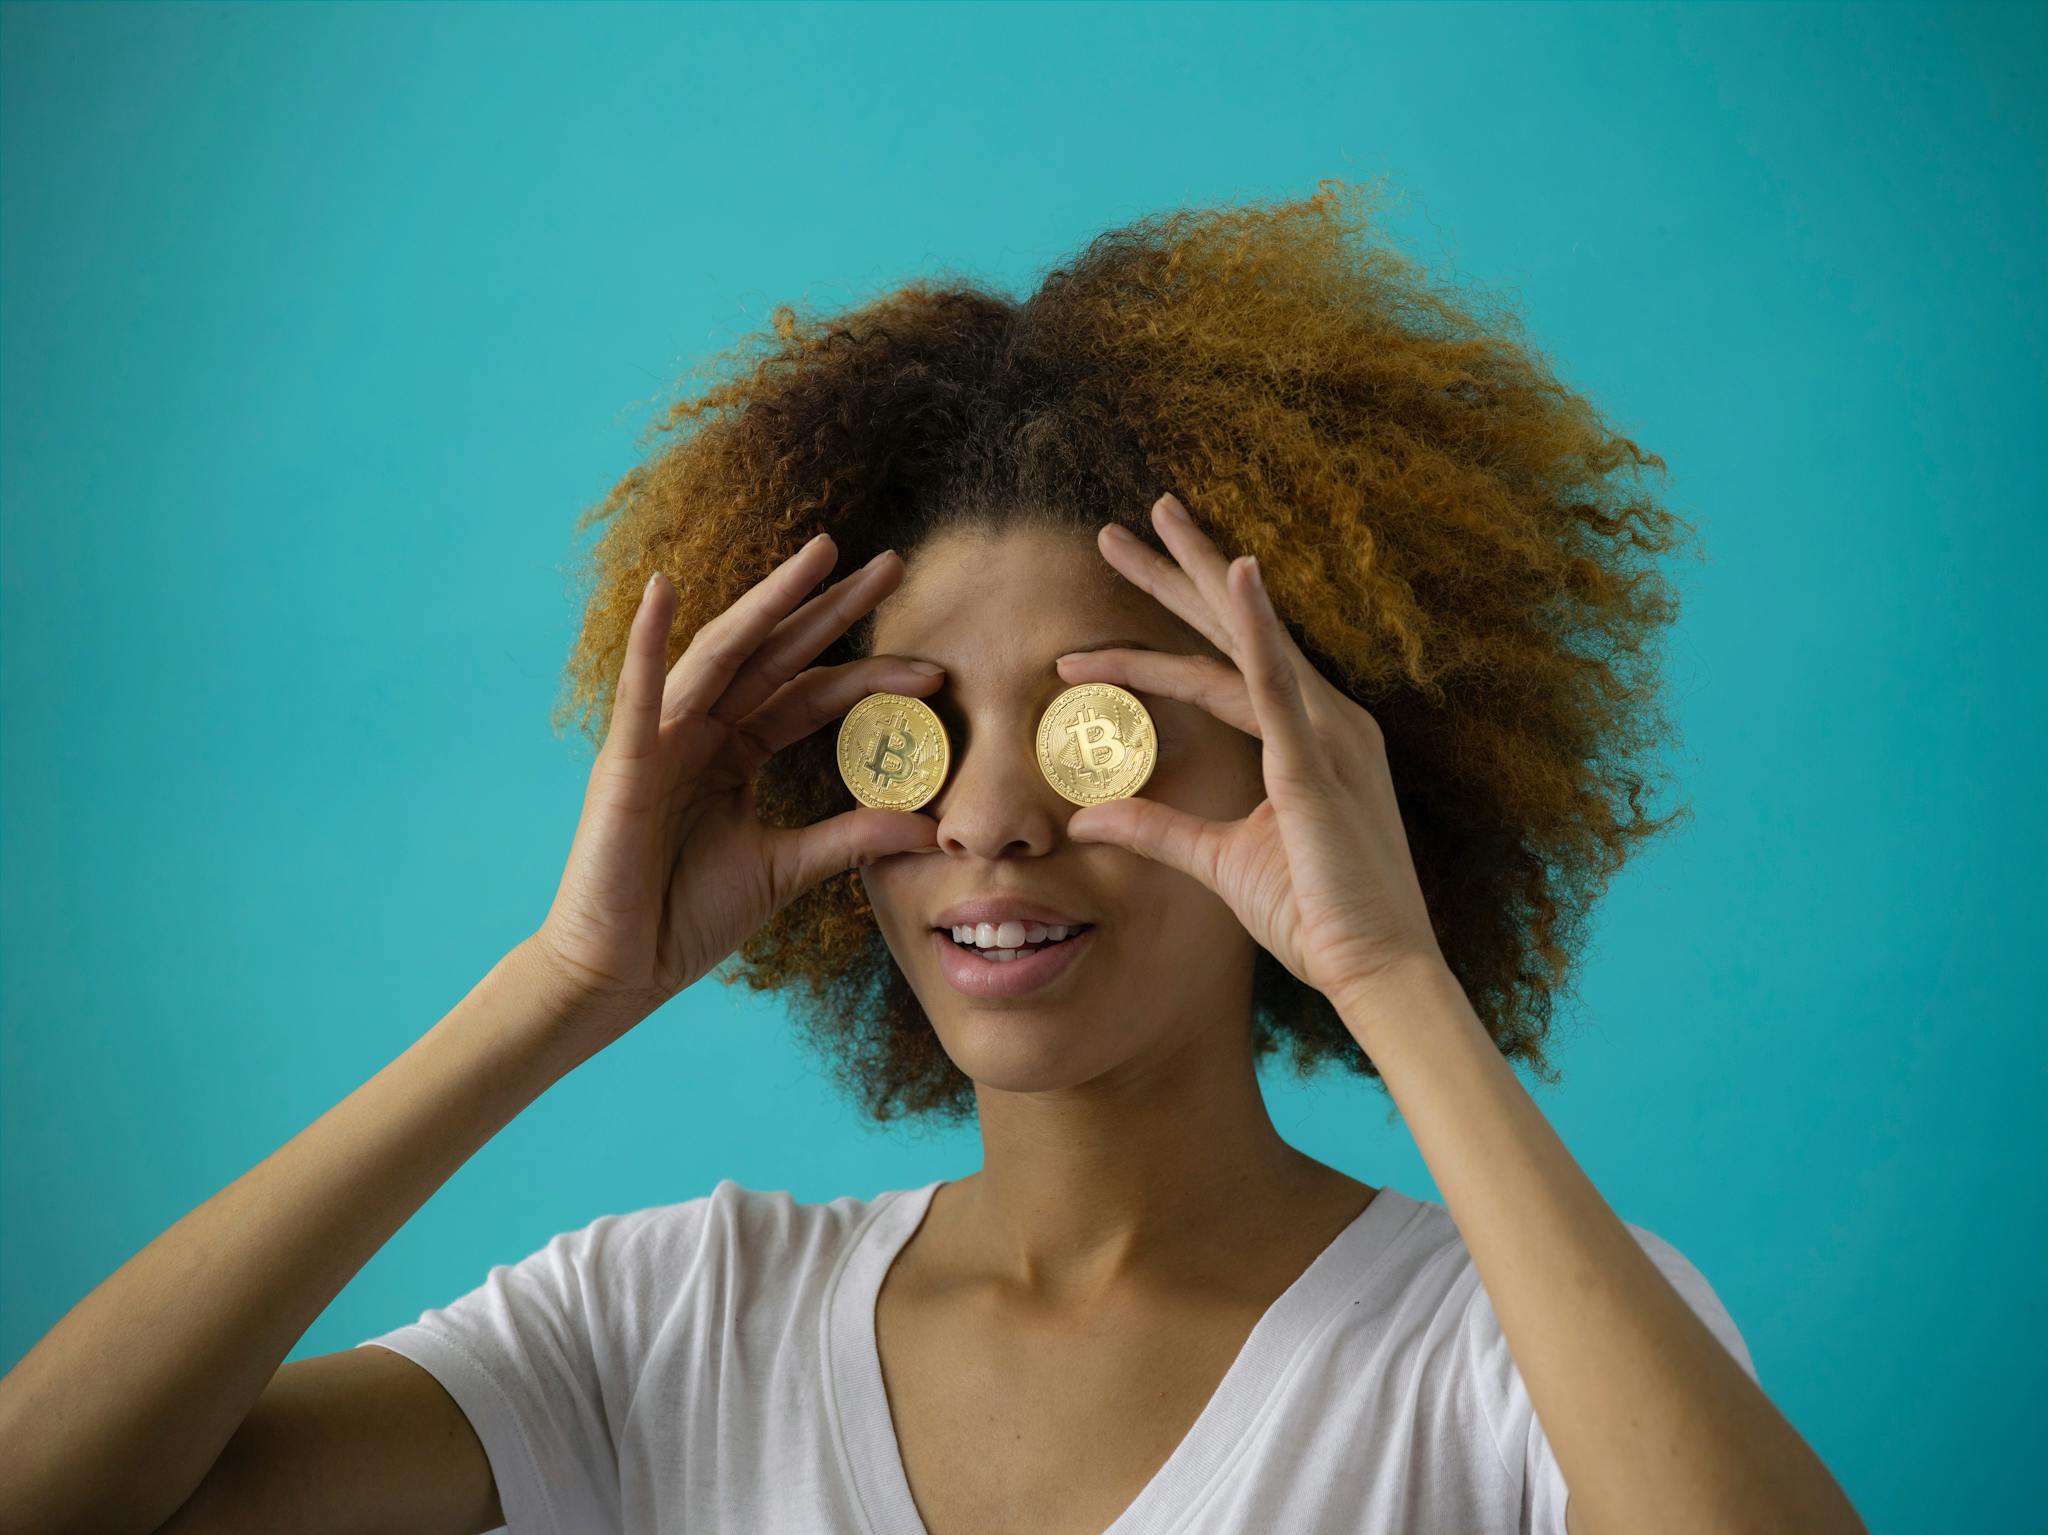 a woman holding two gold coins over her eyes